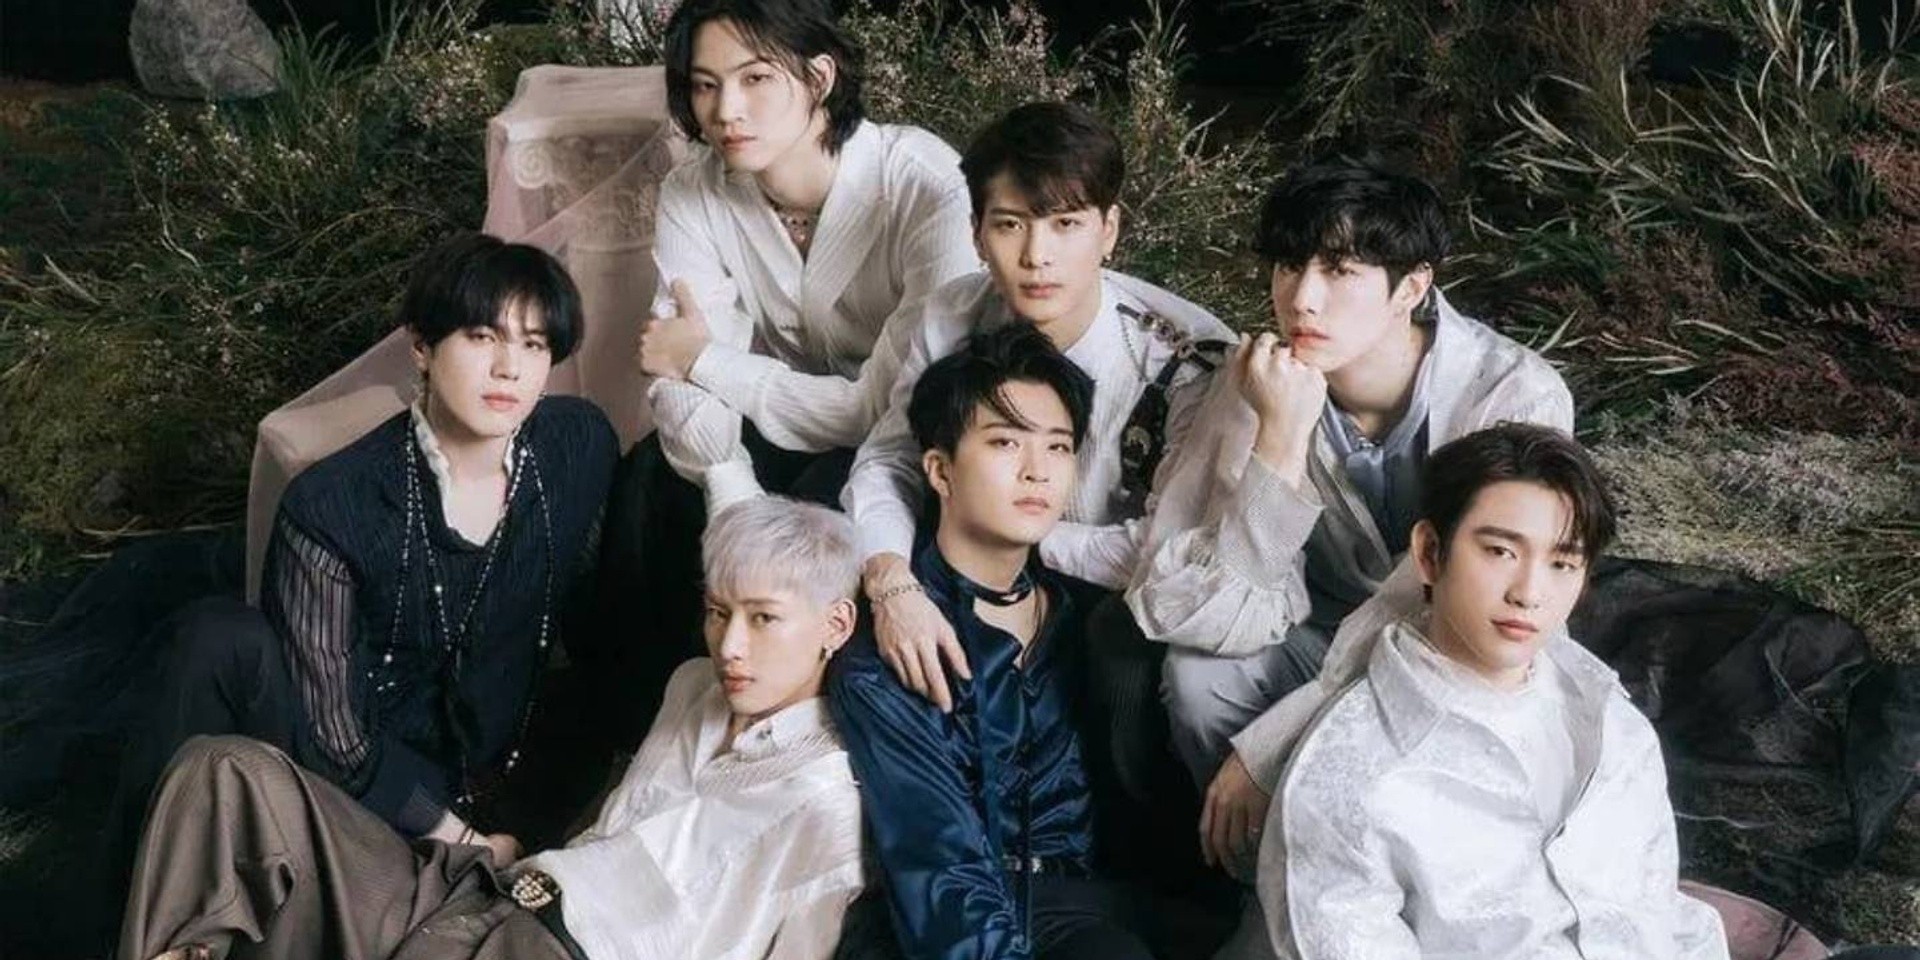 Mark Tuan assures fans this is "just the beginning" as GOT7 end contract with JYP Entertainment, fans show support with #GOT7Forever